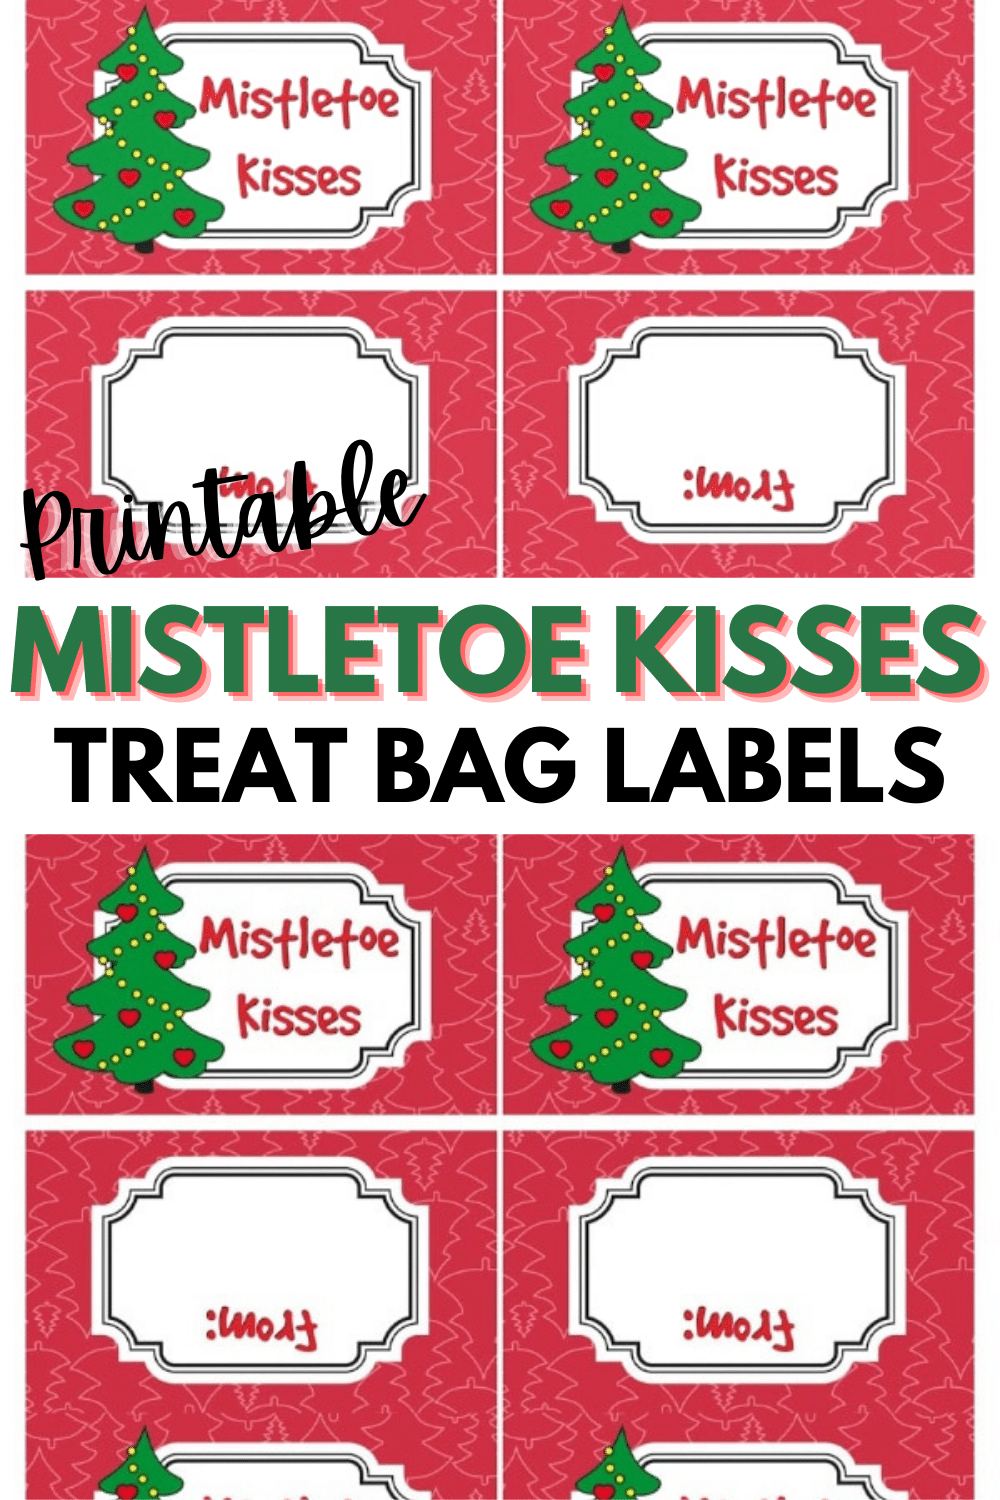 Mistletoe Kisses Treat Bags comes with printable treat bag toppers and are such a quick gift to make. Fill the treat bags with Hershey kisses and give away. #treatbags #christmas #printables via @wondermomwannab